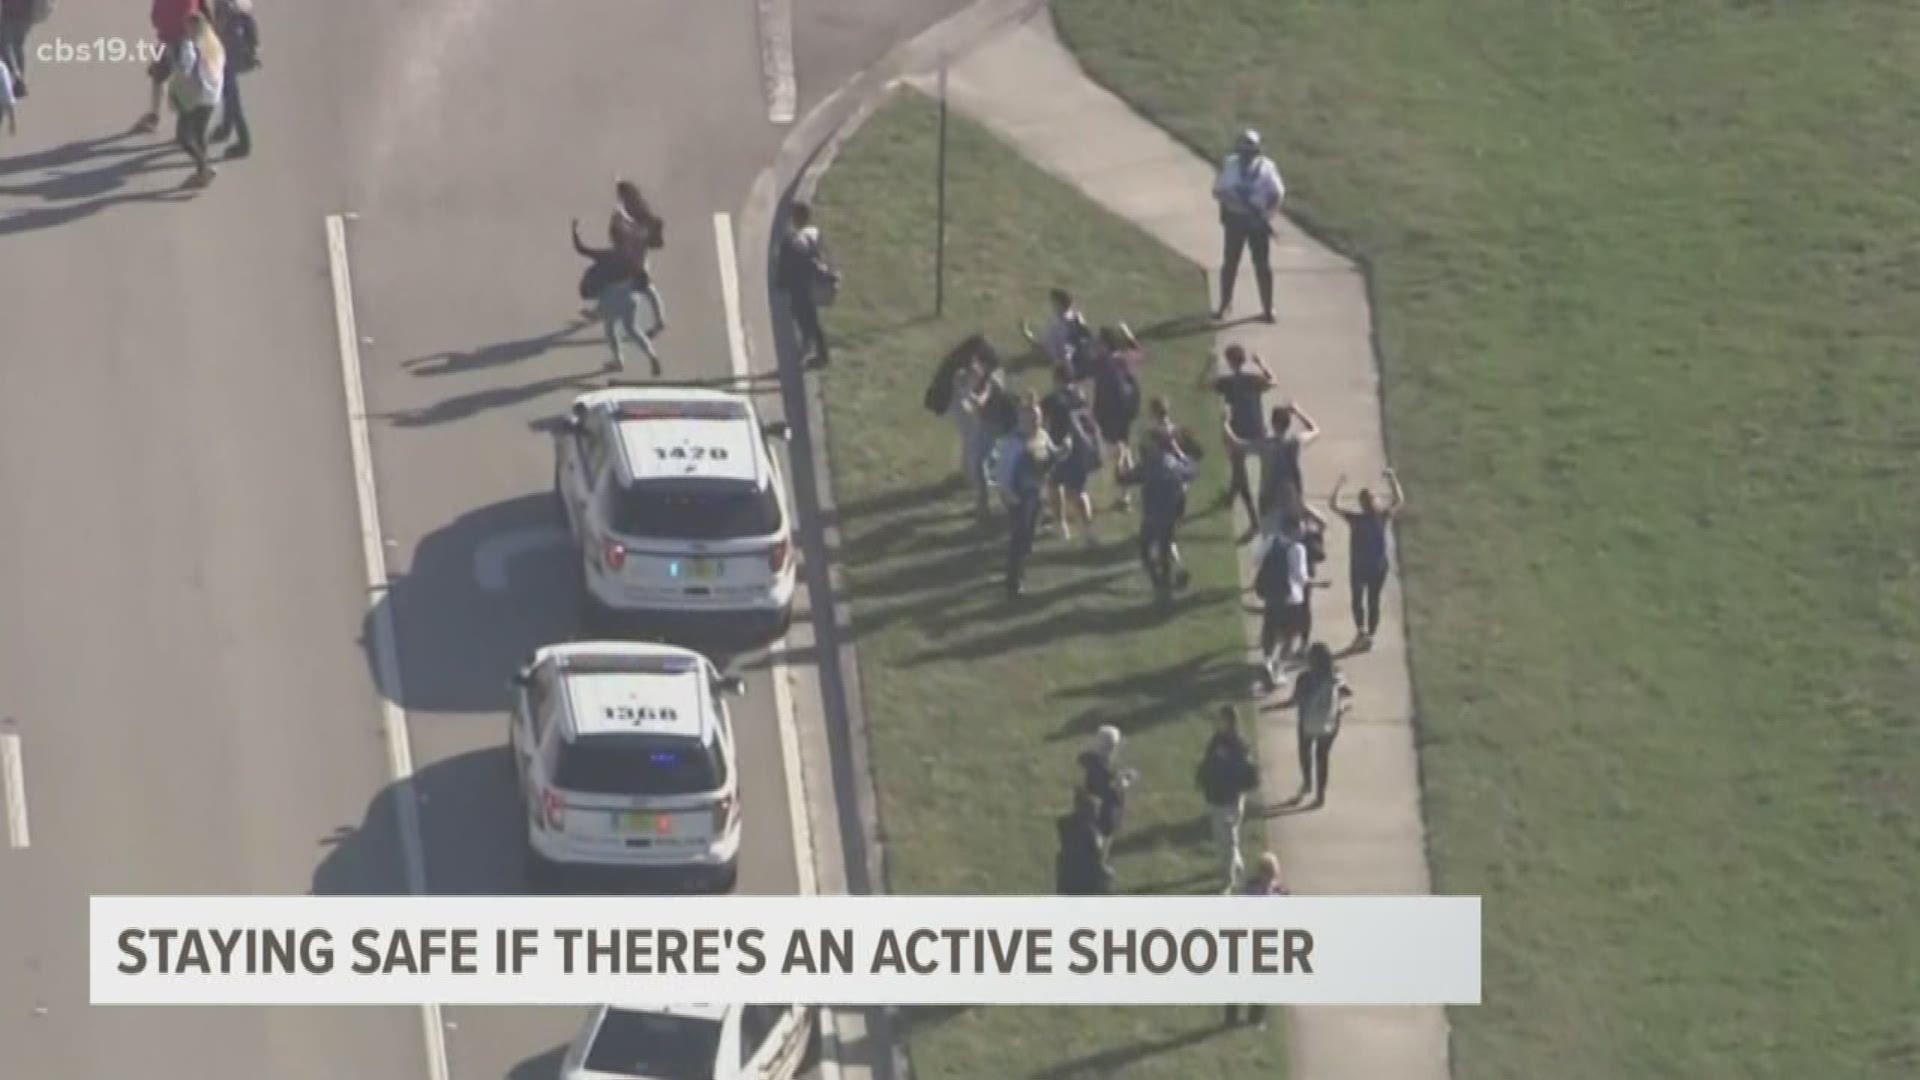 What you should do if you find yourself in an active shooter situation